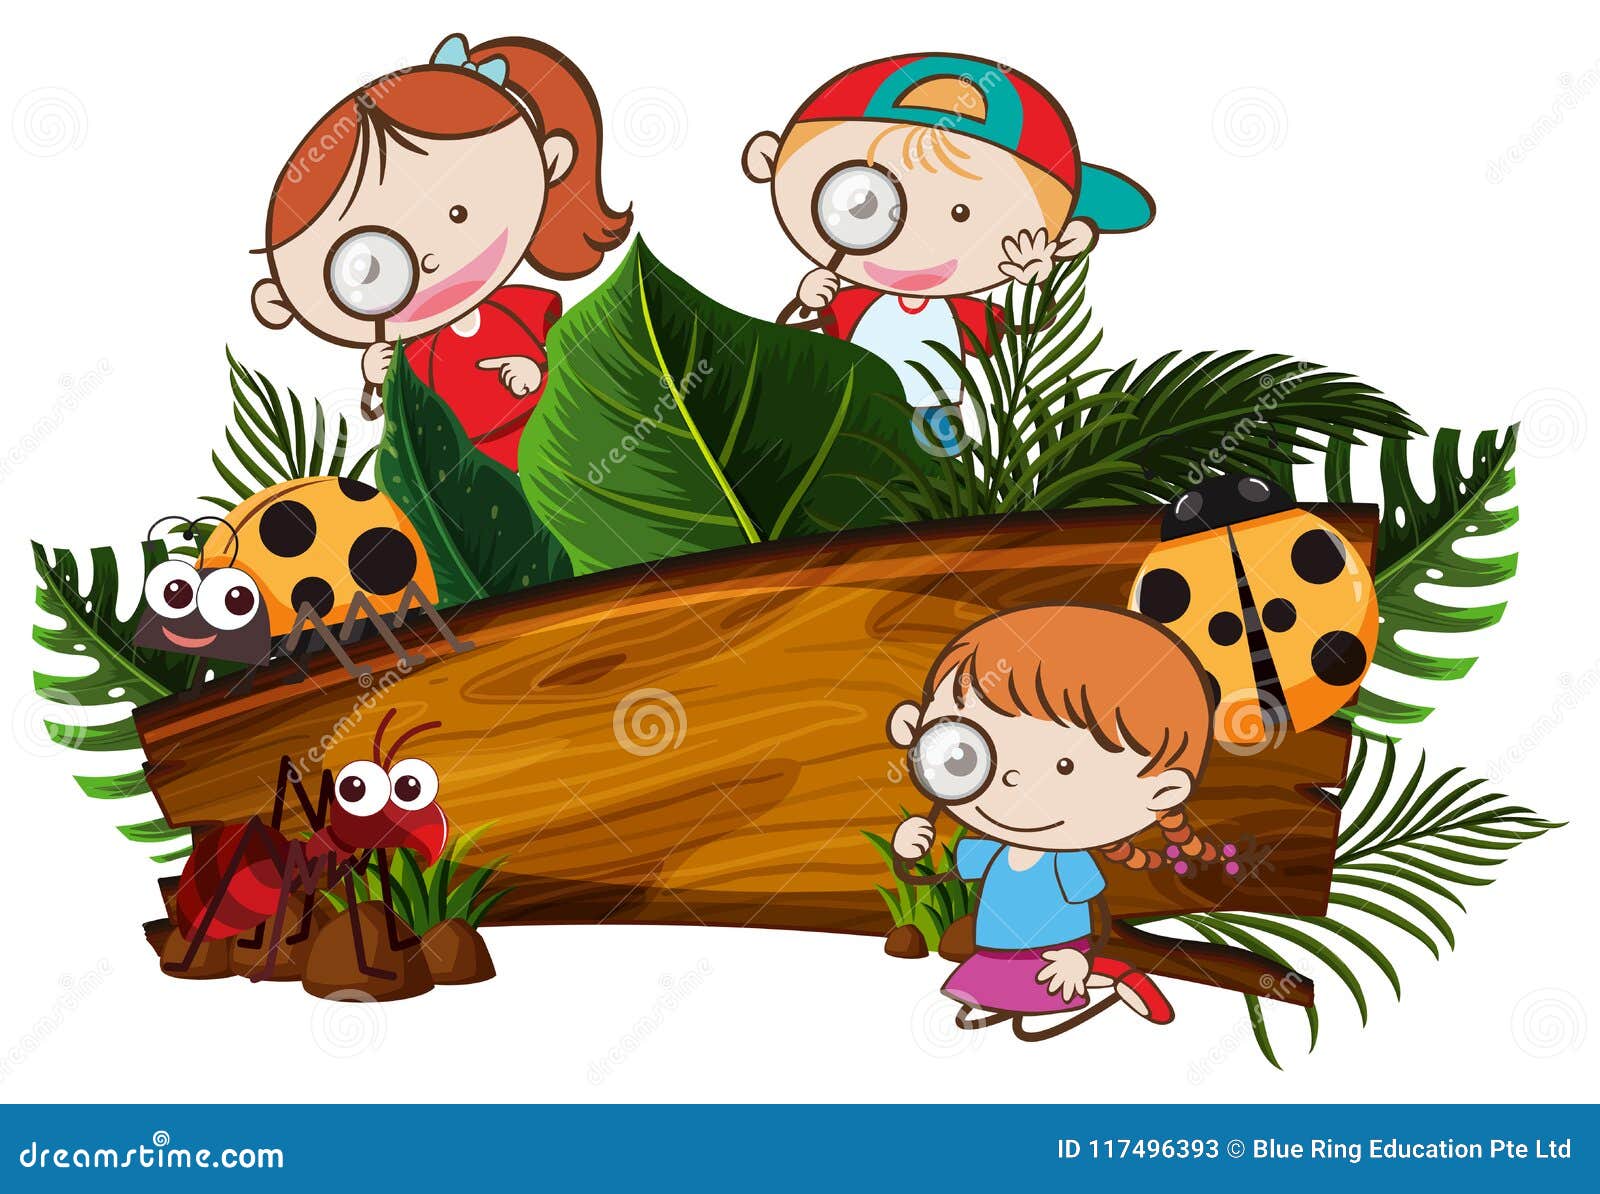 Kids Exploring the Nature Banner Stock Vector - Illustration of scout: